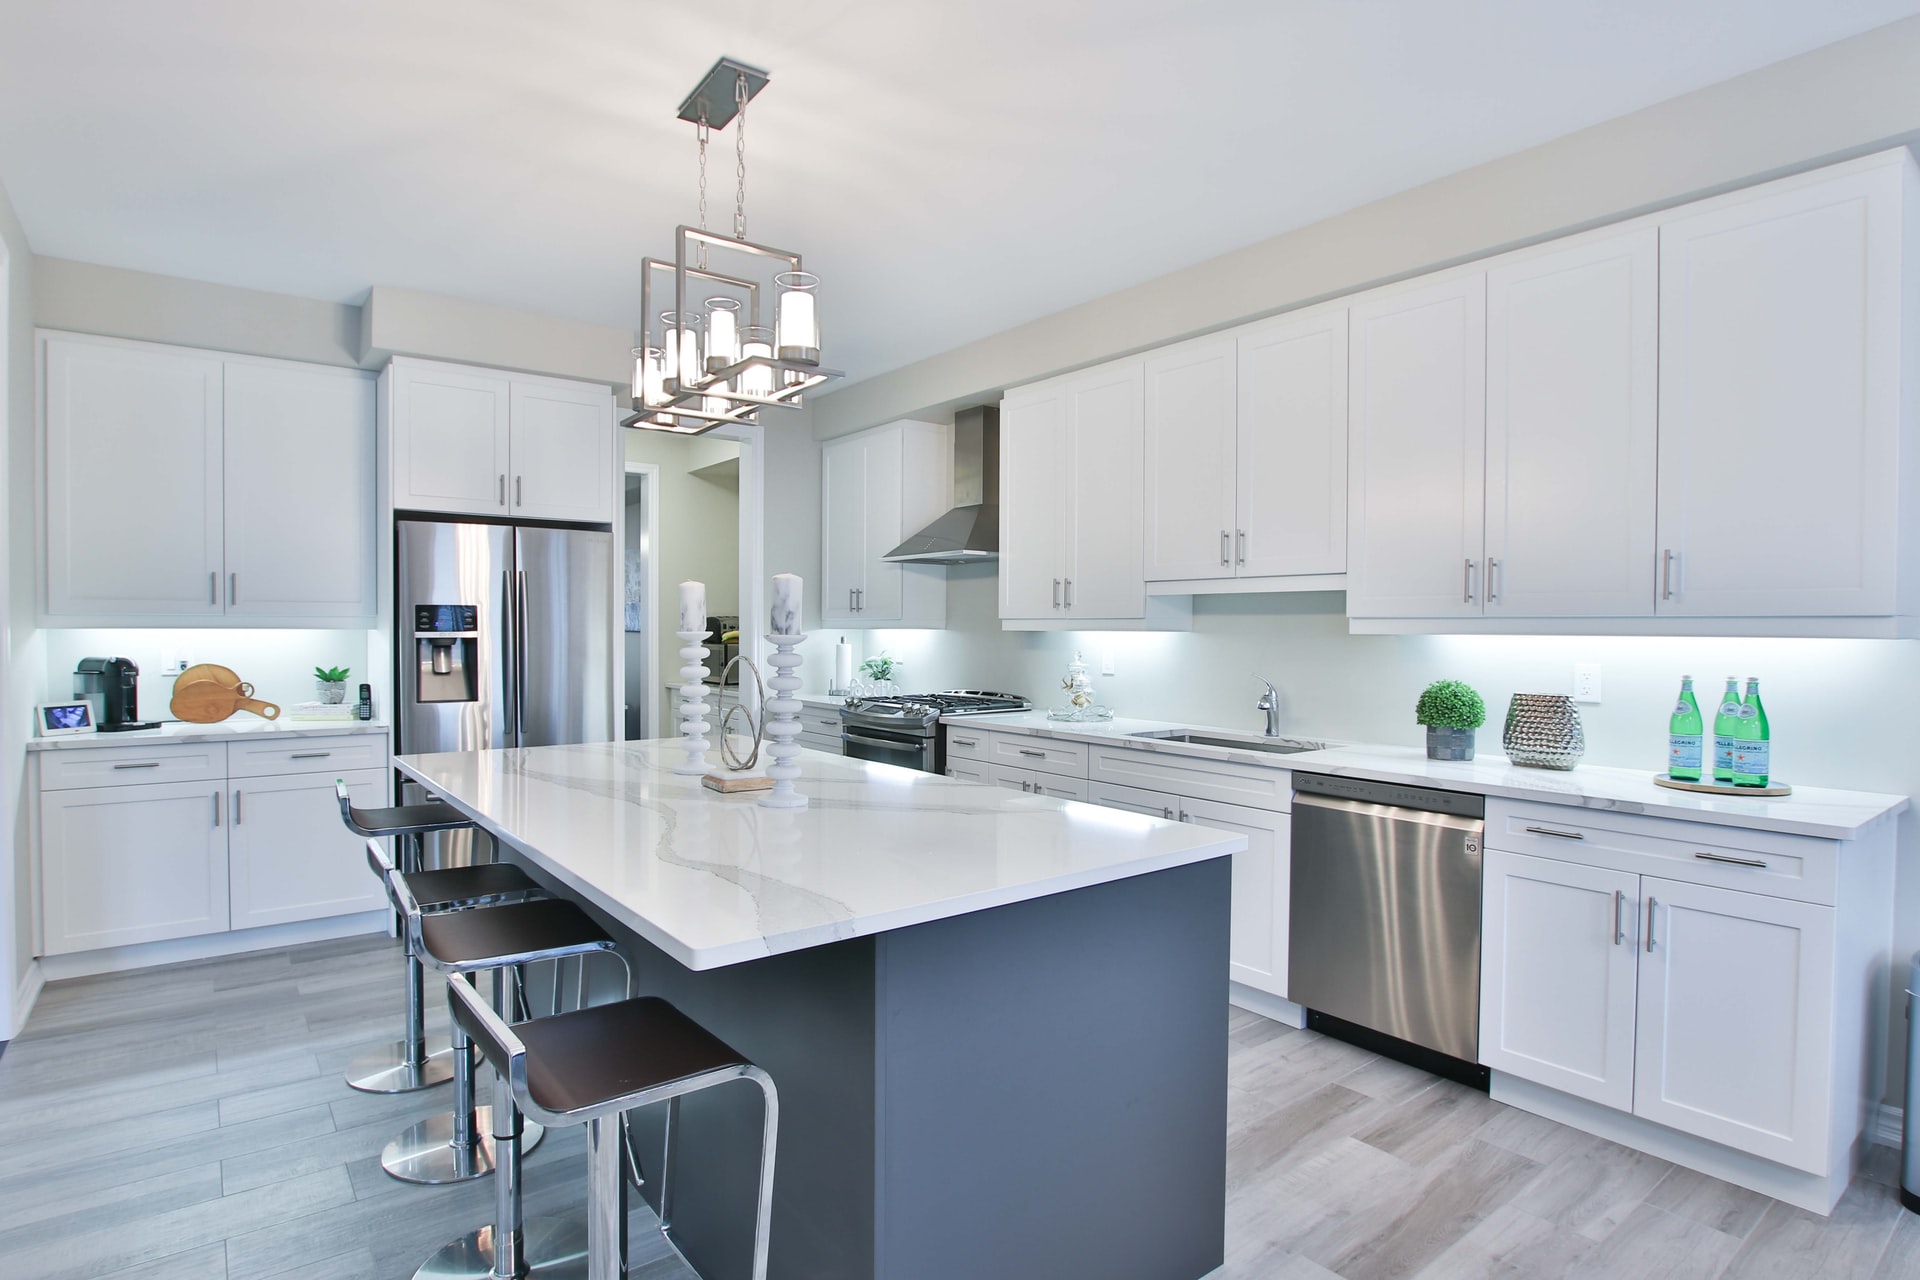 Cool colors kitchen remodel with white cabinetry and navy color palette